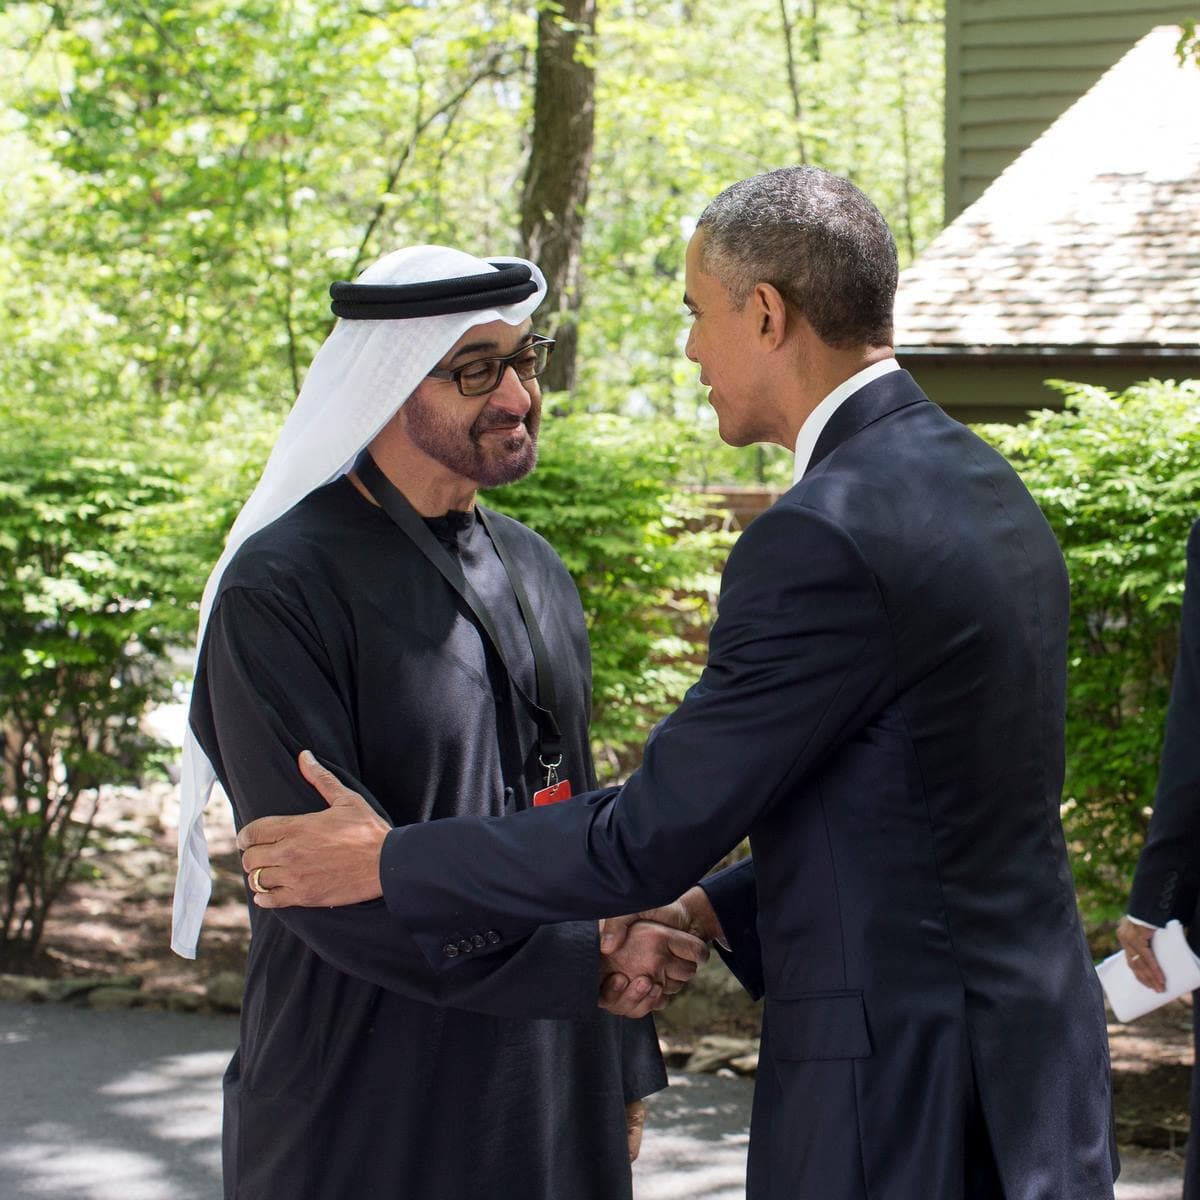 His Highness Sheikh Mohamed bin Zayed Al Nahyan, Crown Prince of Abu Dhabi arrives for the Camp David Summit along with delegations from all Gulf Cooperation Council countries hosted by United States President Barack Obam.